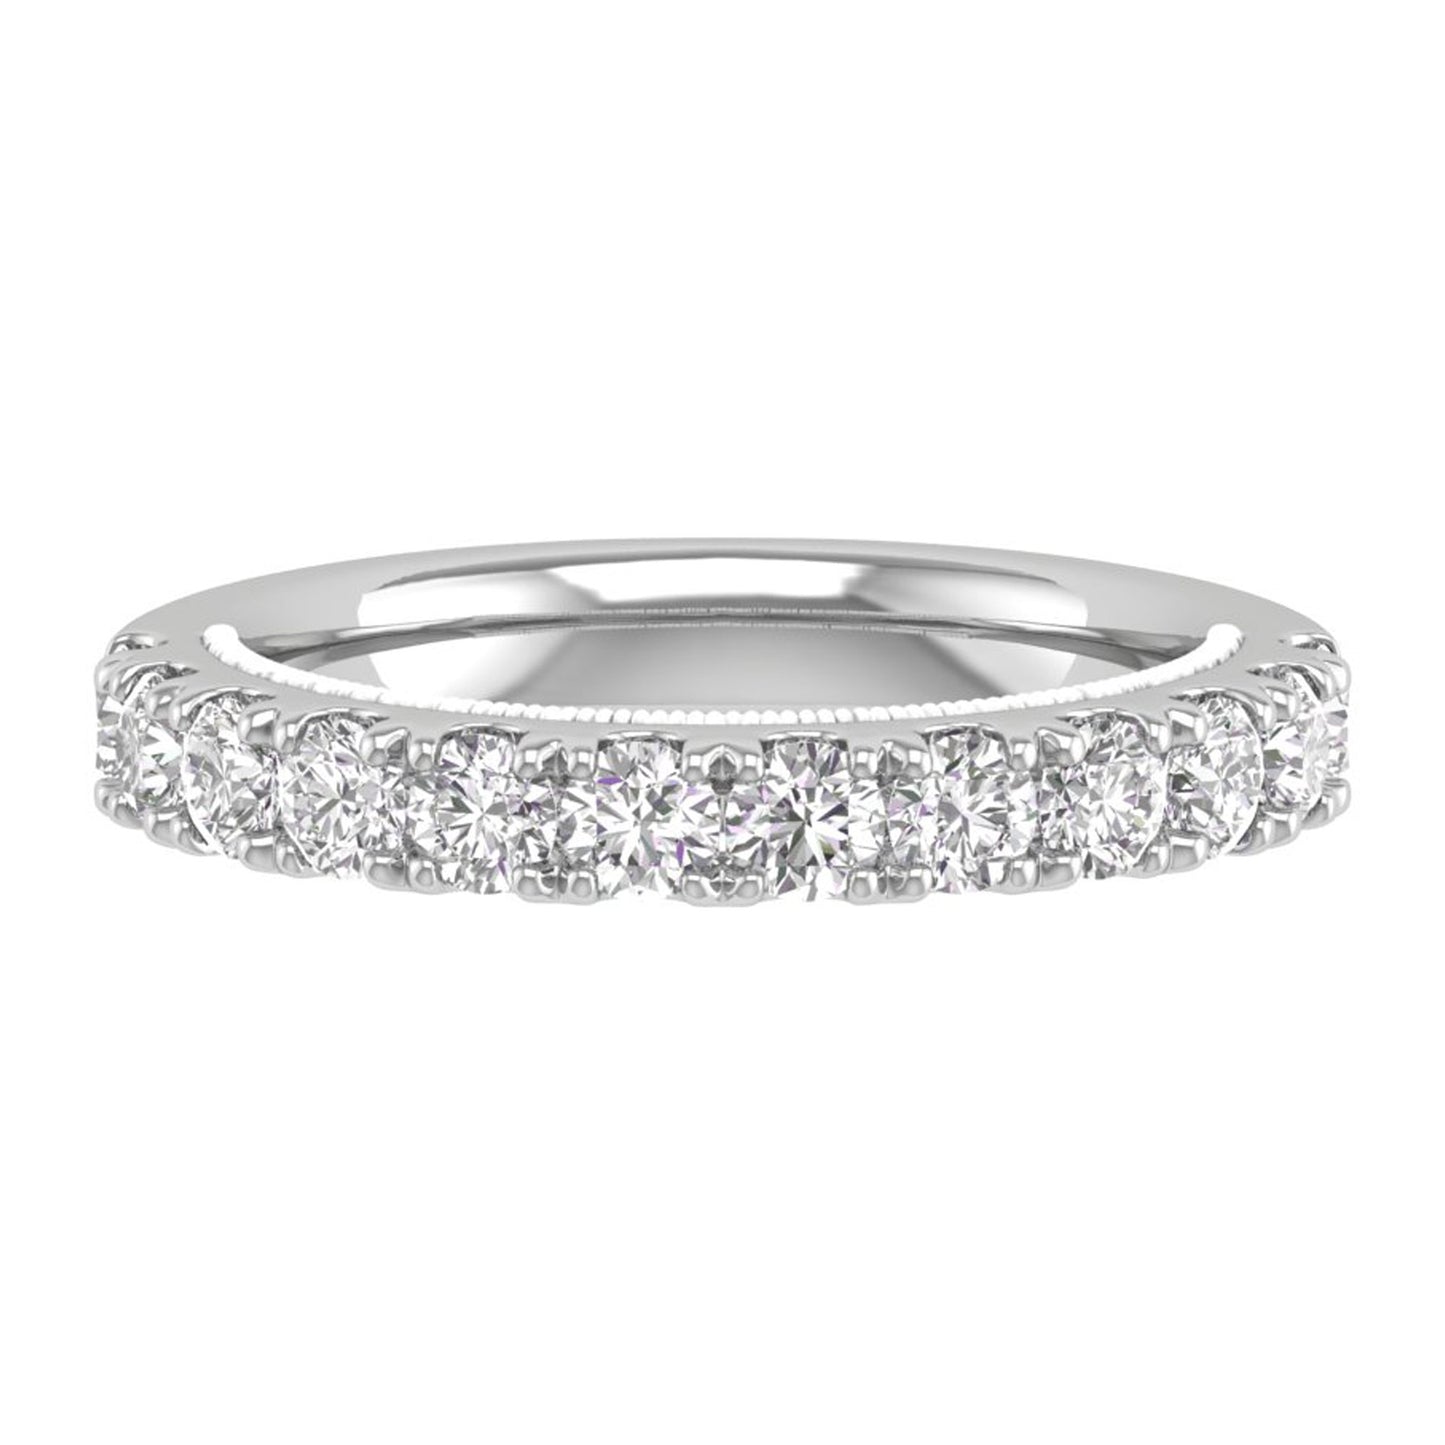 1 CTW COLORLESS FLAWLESS FRENCH PAVÉ WITH MILGRAIN WEDDING BAND